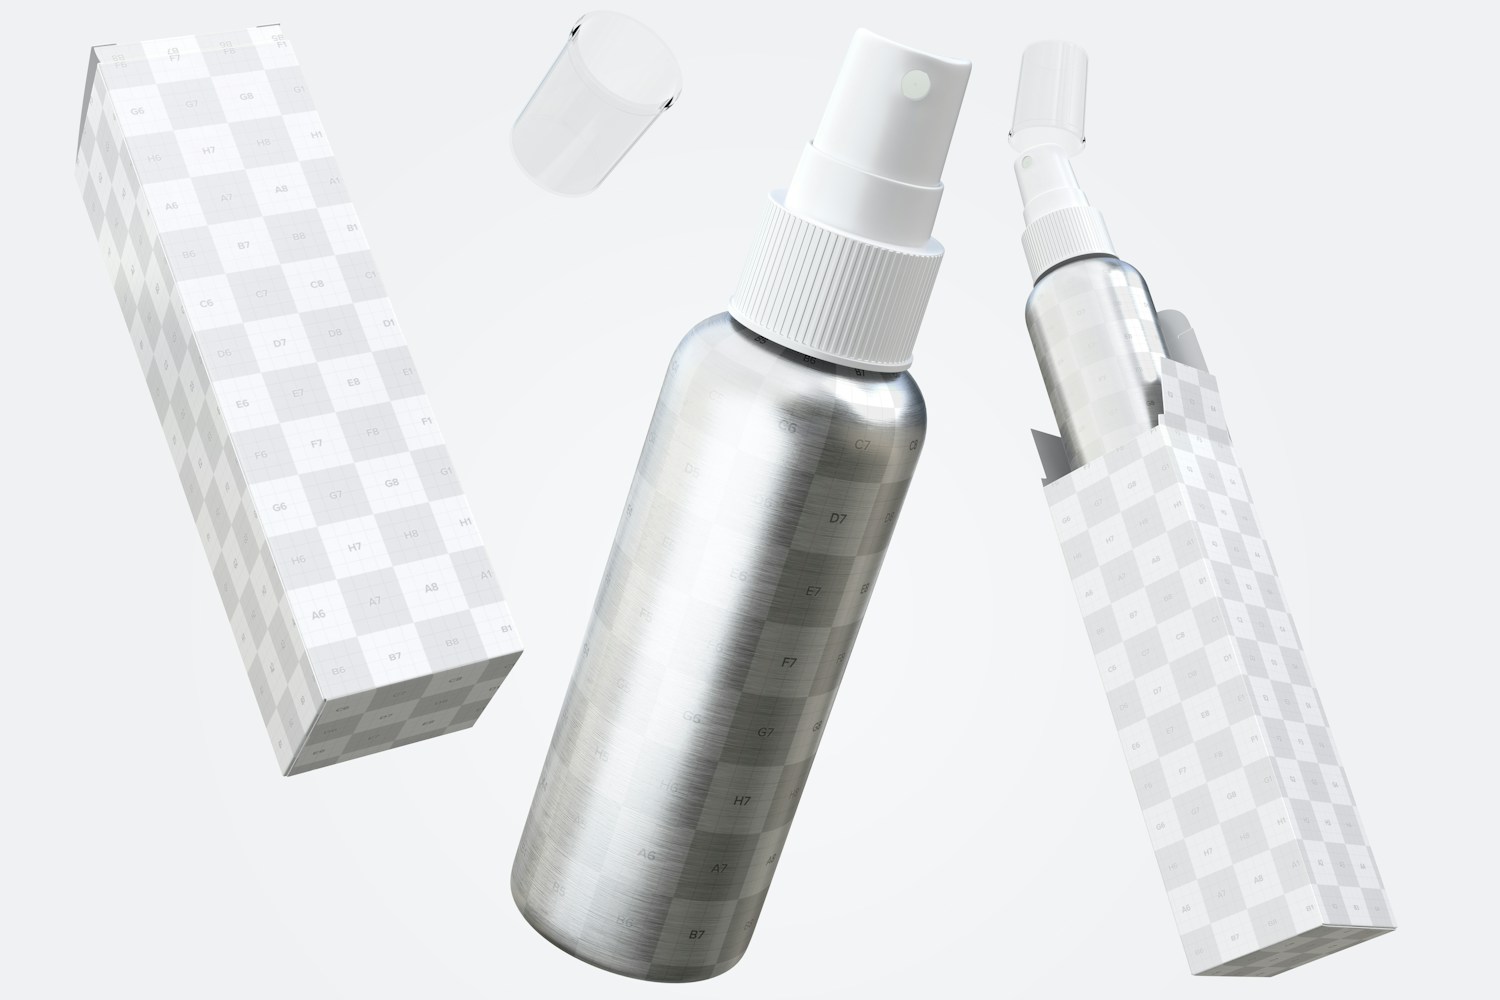 4 oz Metallic Spray Bottles Mockup with Paper Boxes, Floating